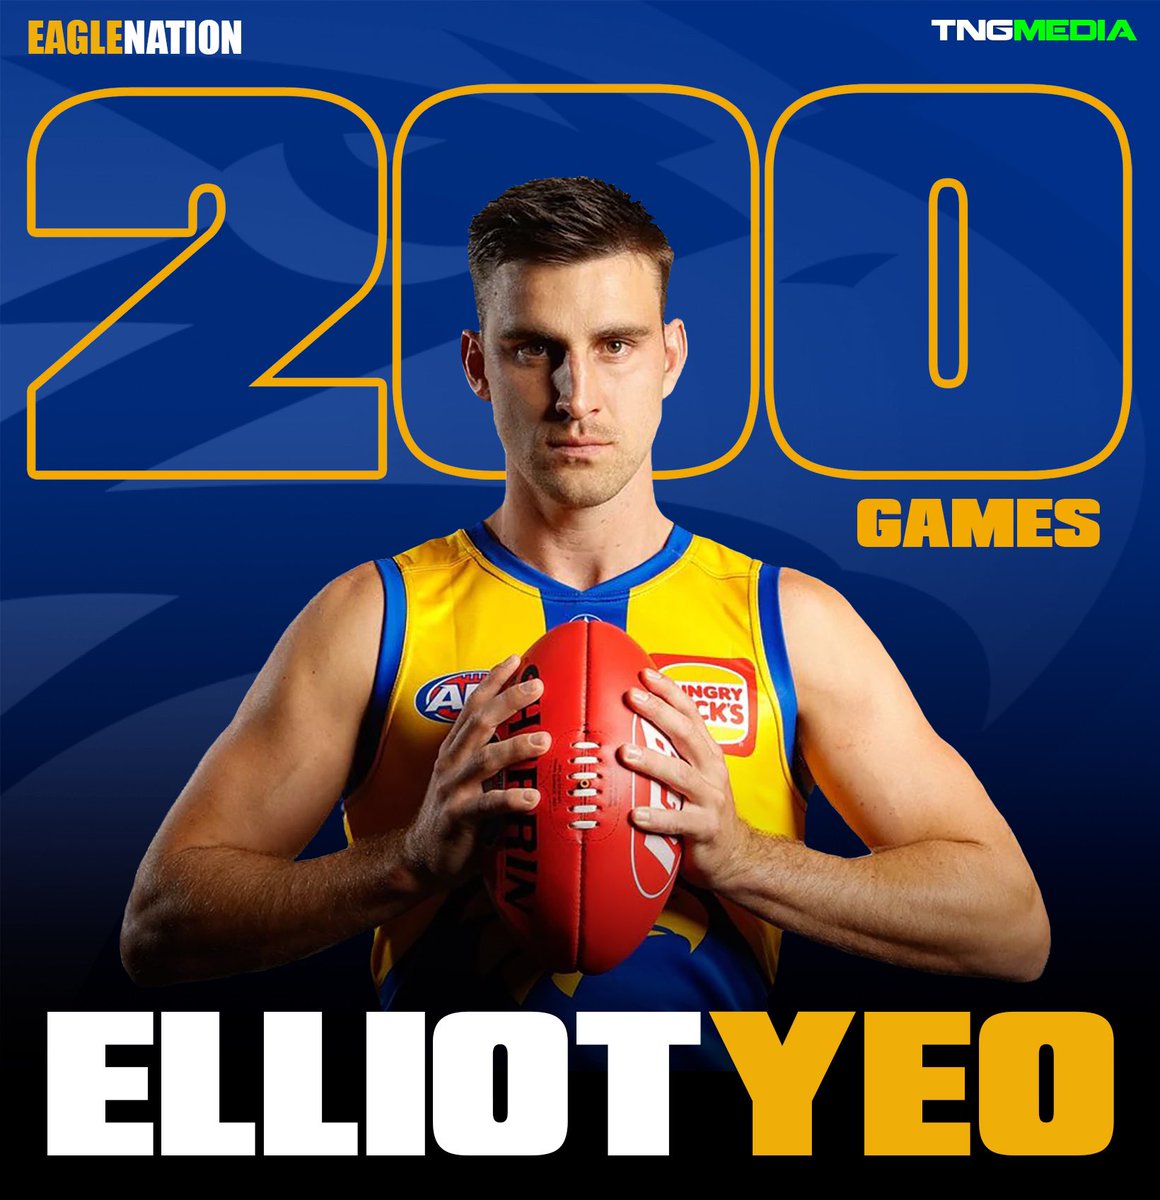 Elliot Yeo will play is 200th game against Essendon in round 8.
Great to see the Bull back to his best after a couple of injury riddles seasons.
Let’s hope for many more in Eagles colours.
Congratulations Elliot. 

#westcoasteagles #westcoast #eagles #podcast #eaglenation